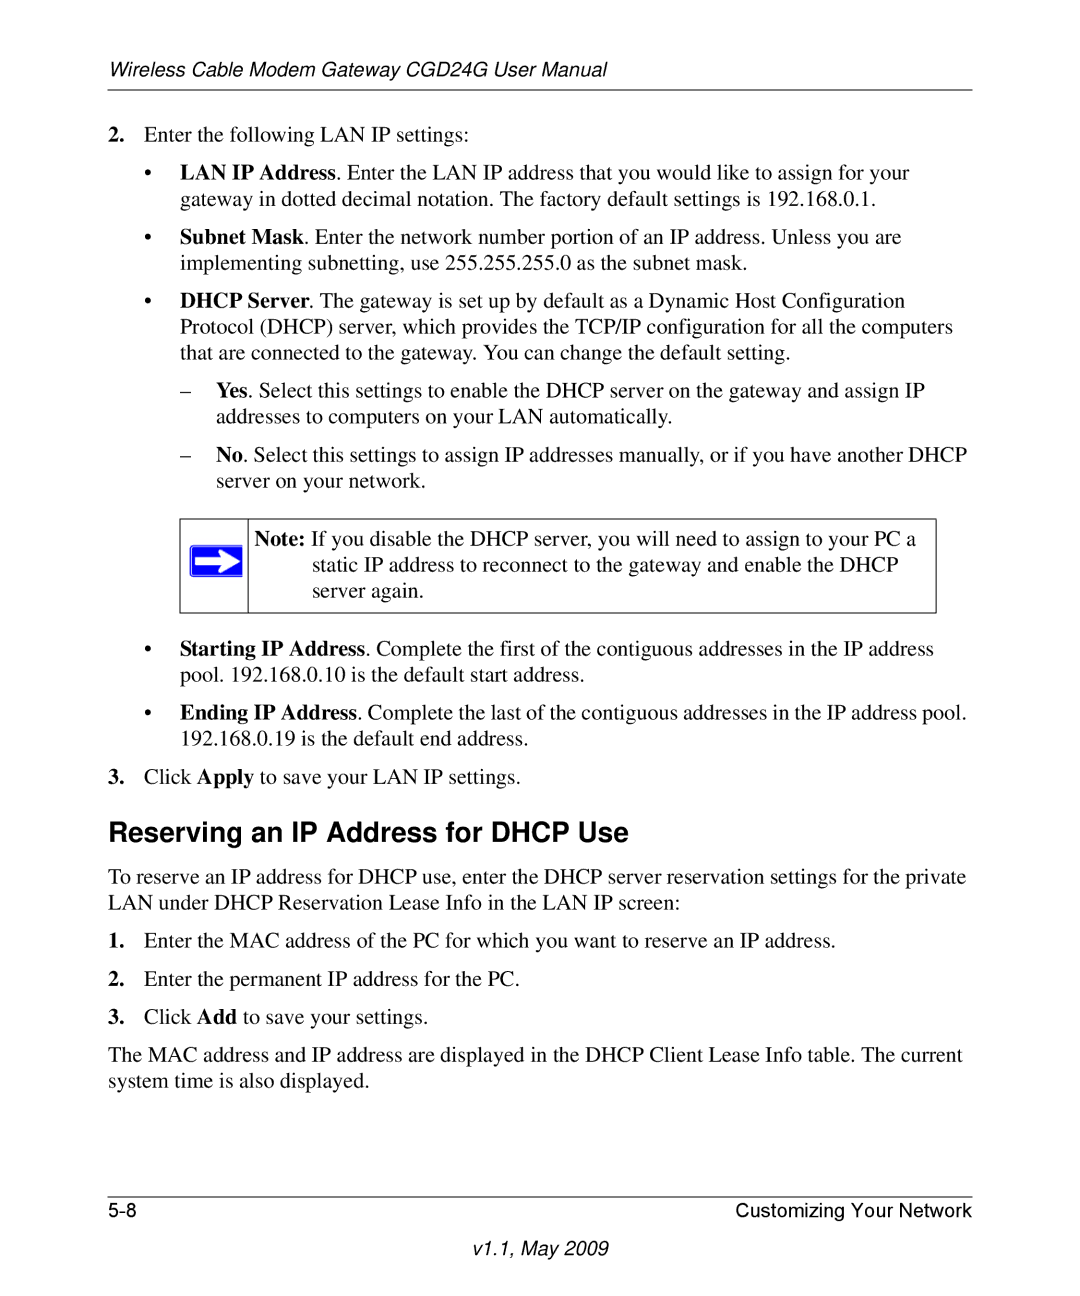 Gateway CGD24G user manual Reserving an IP Address for Dhcp Use 